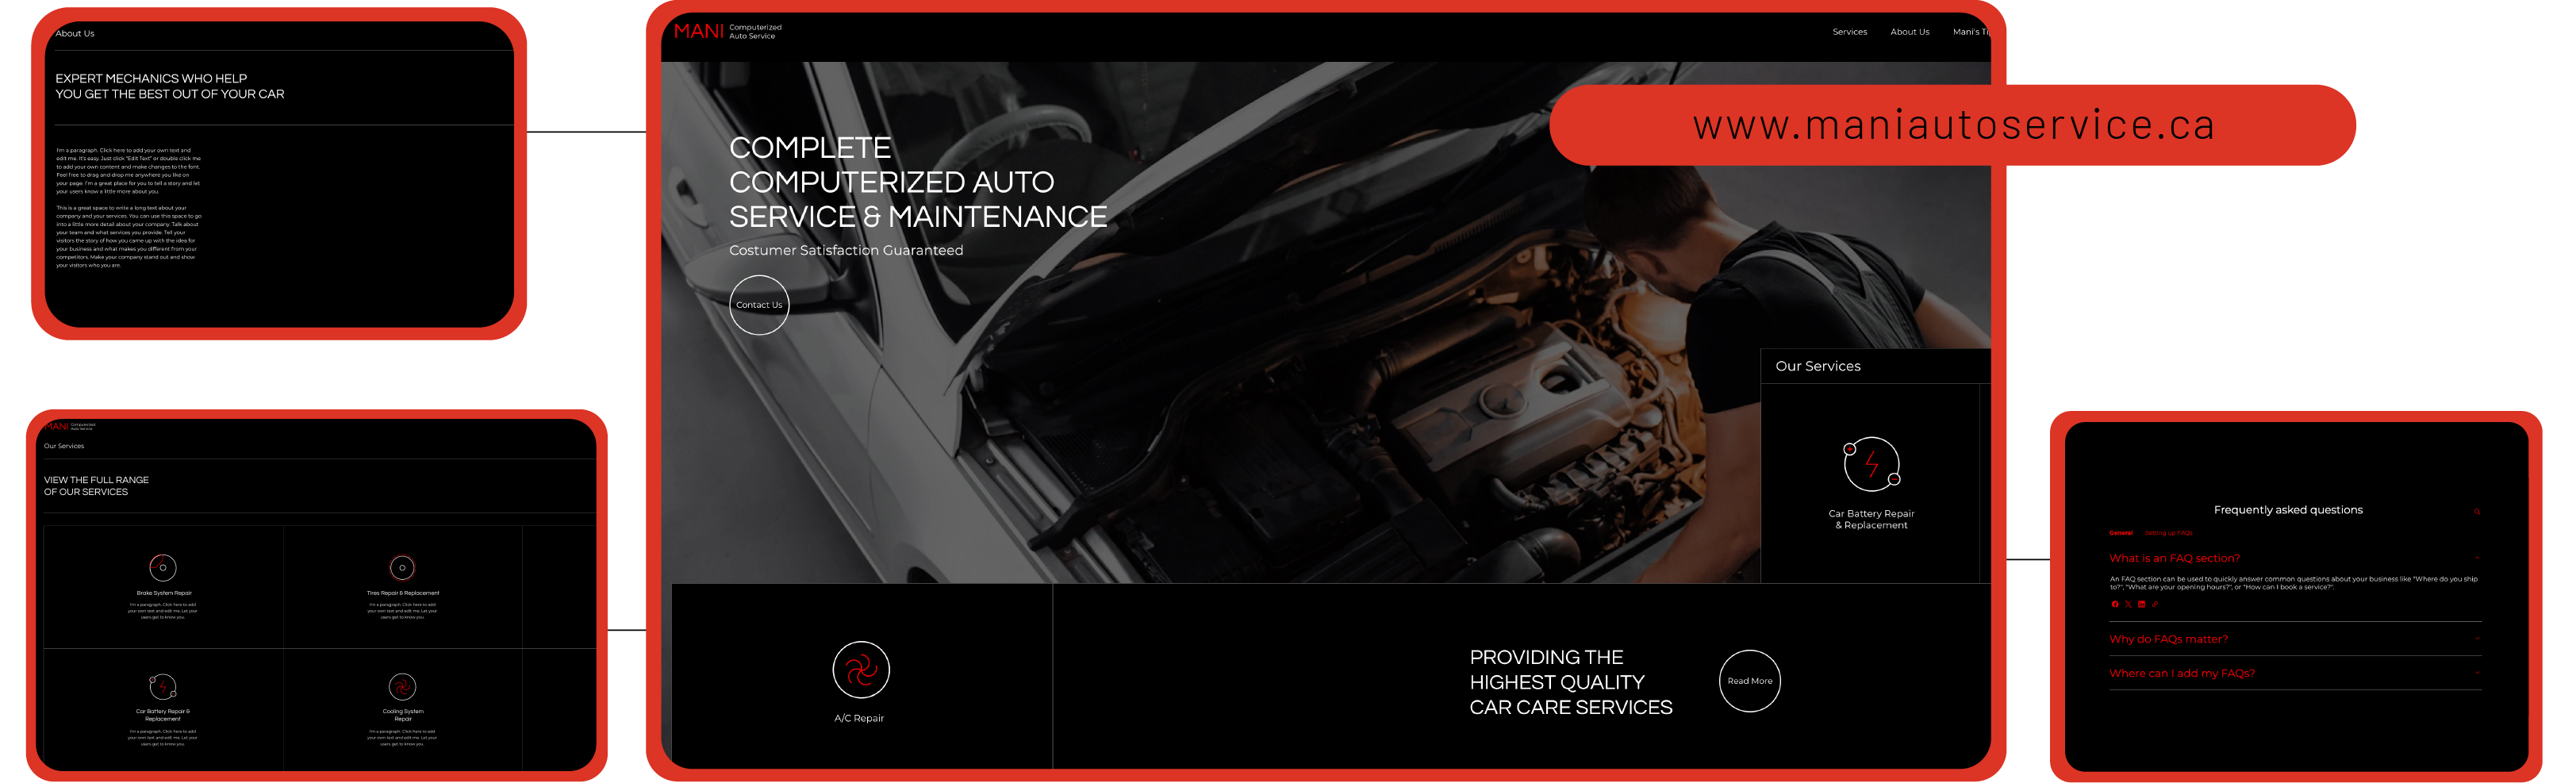 How to Build a Website for Your Auto Repair Shop in 4 Easy Steps 